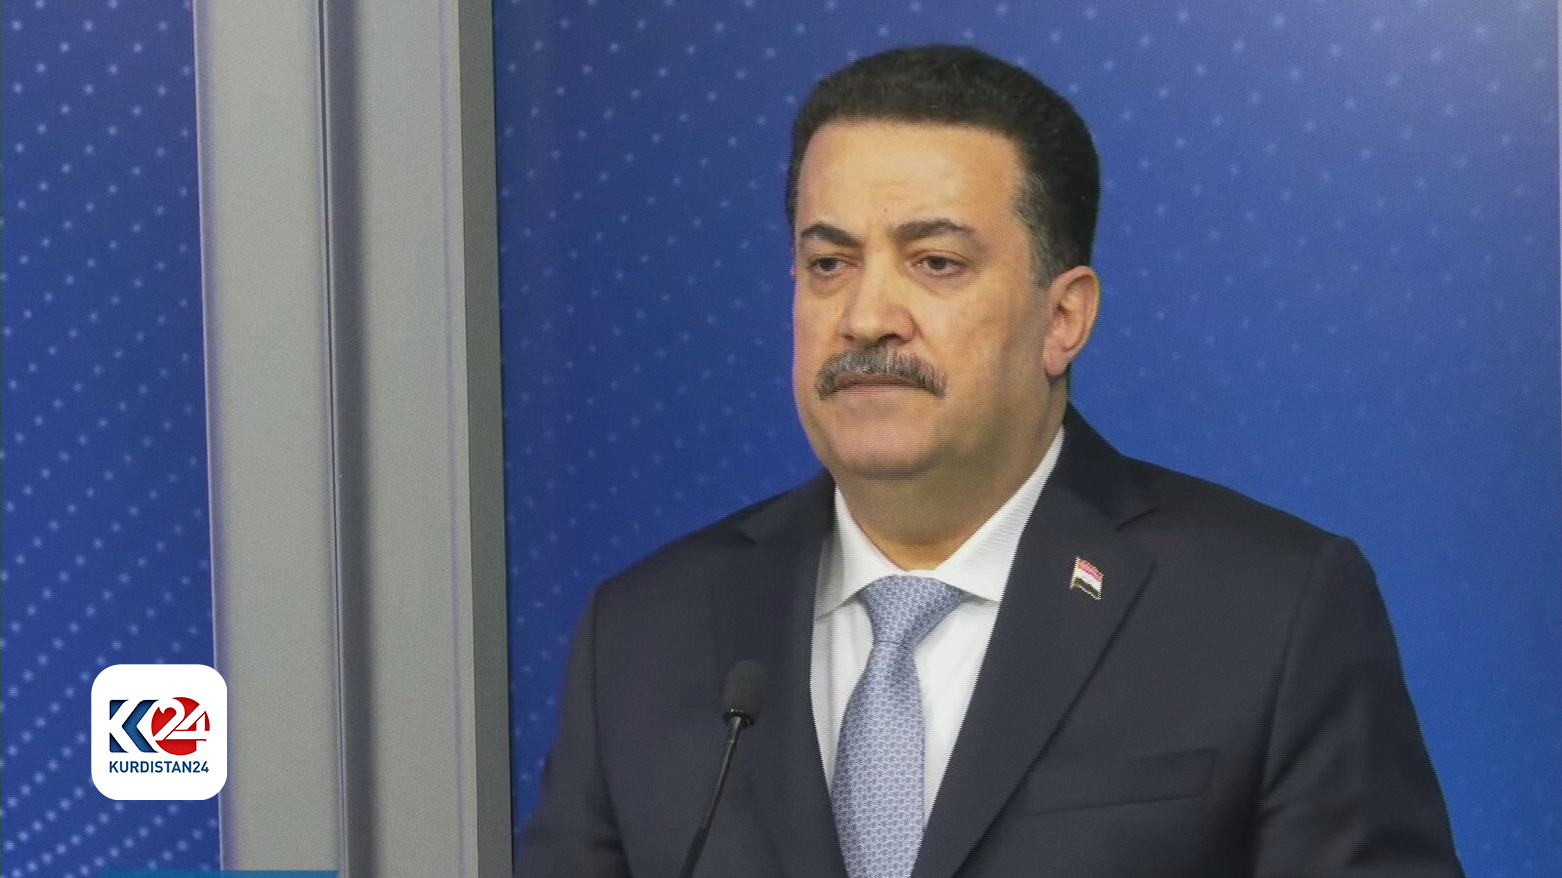 There are more than  contracted employees in Kurdistan Region says spox